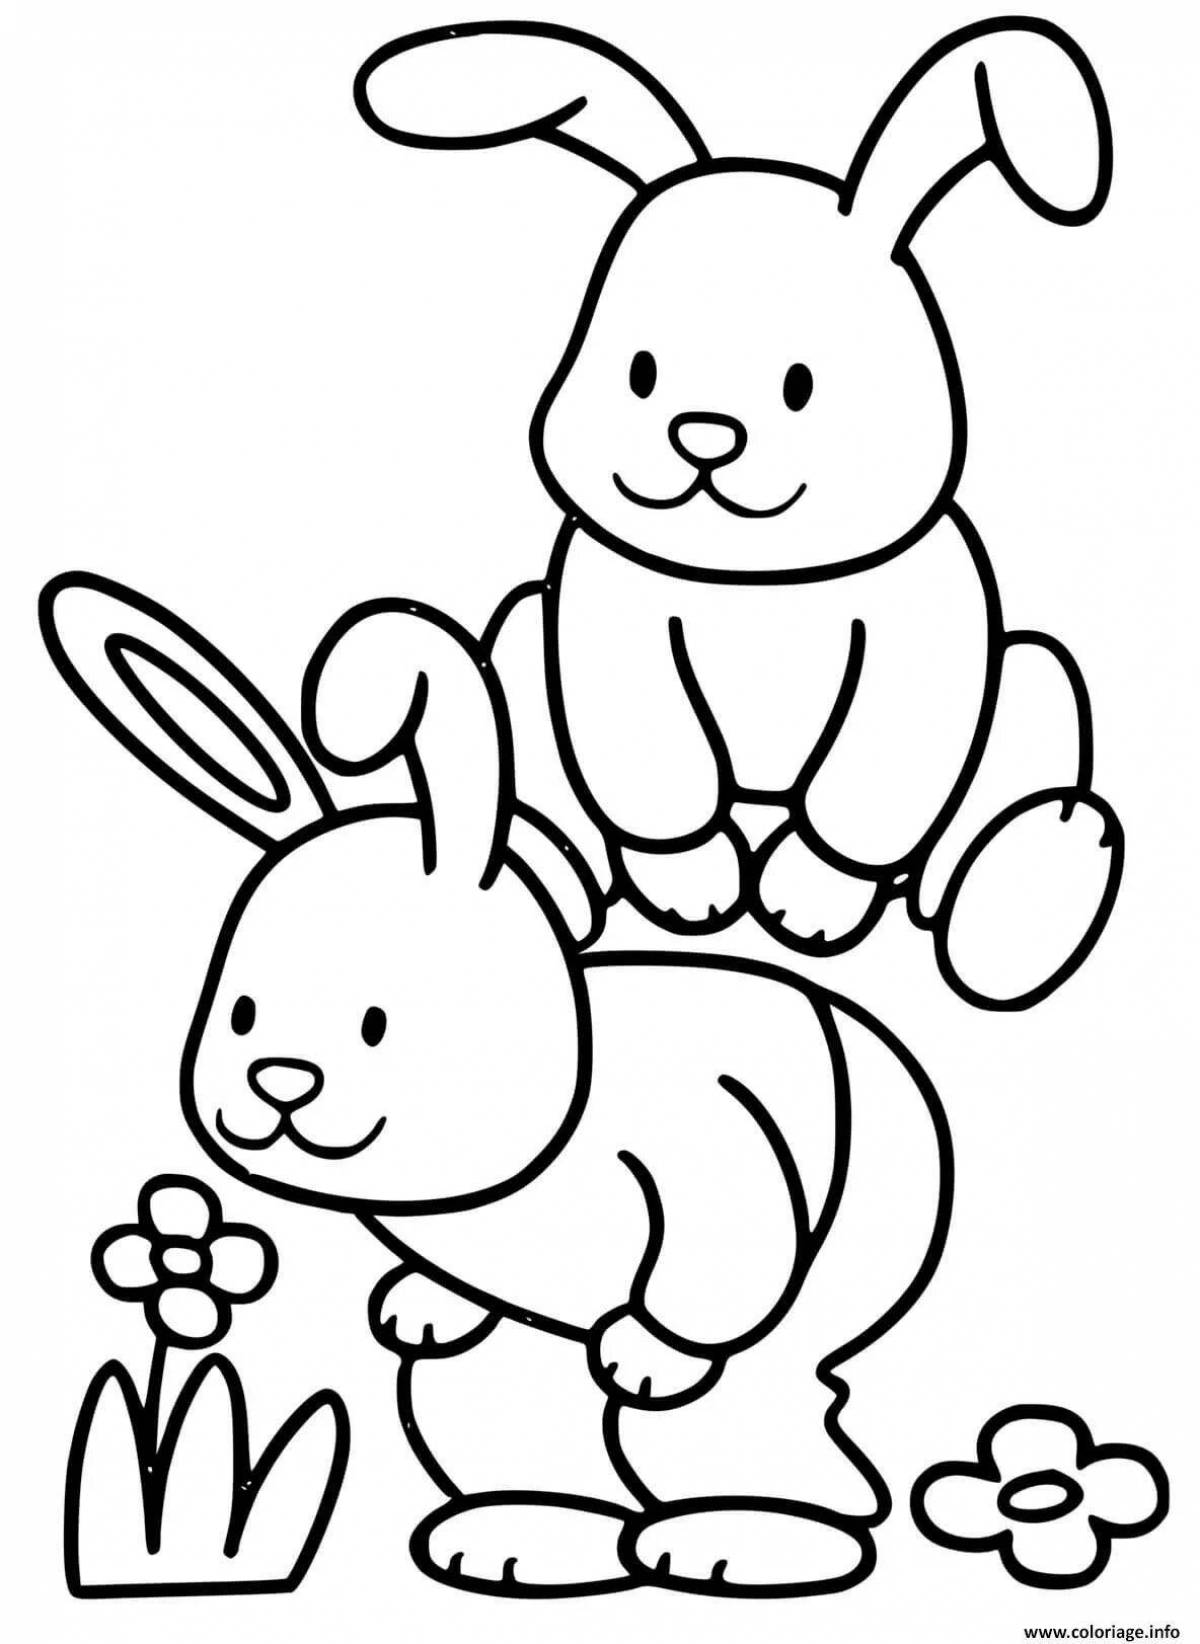 Fabulous hare coloring for kids